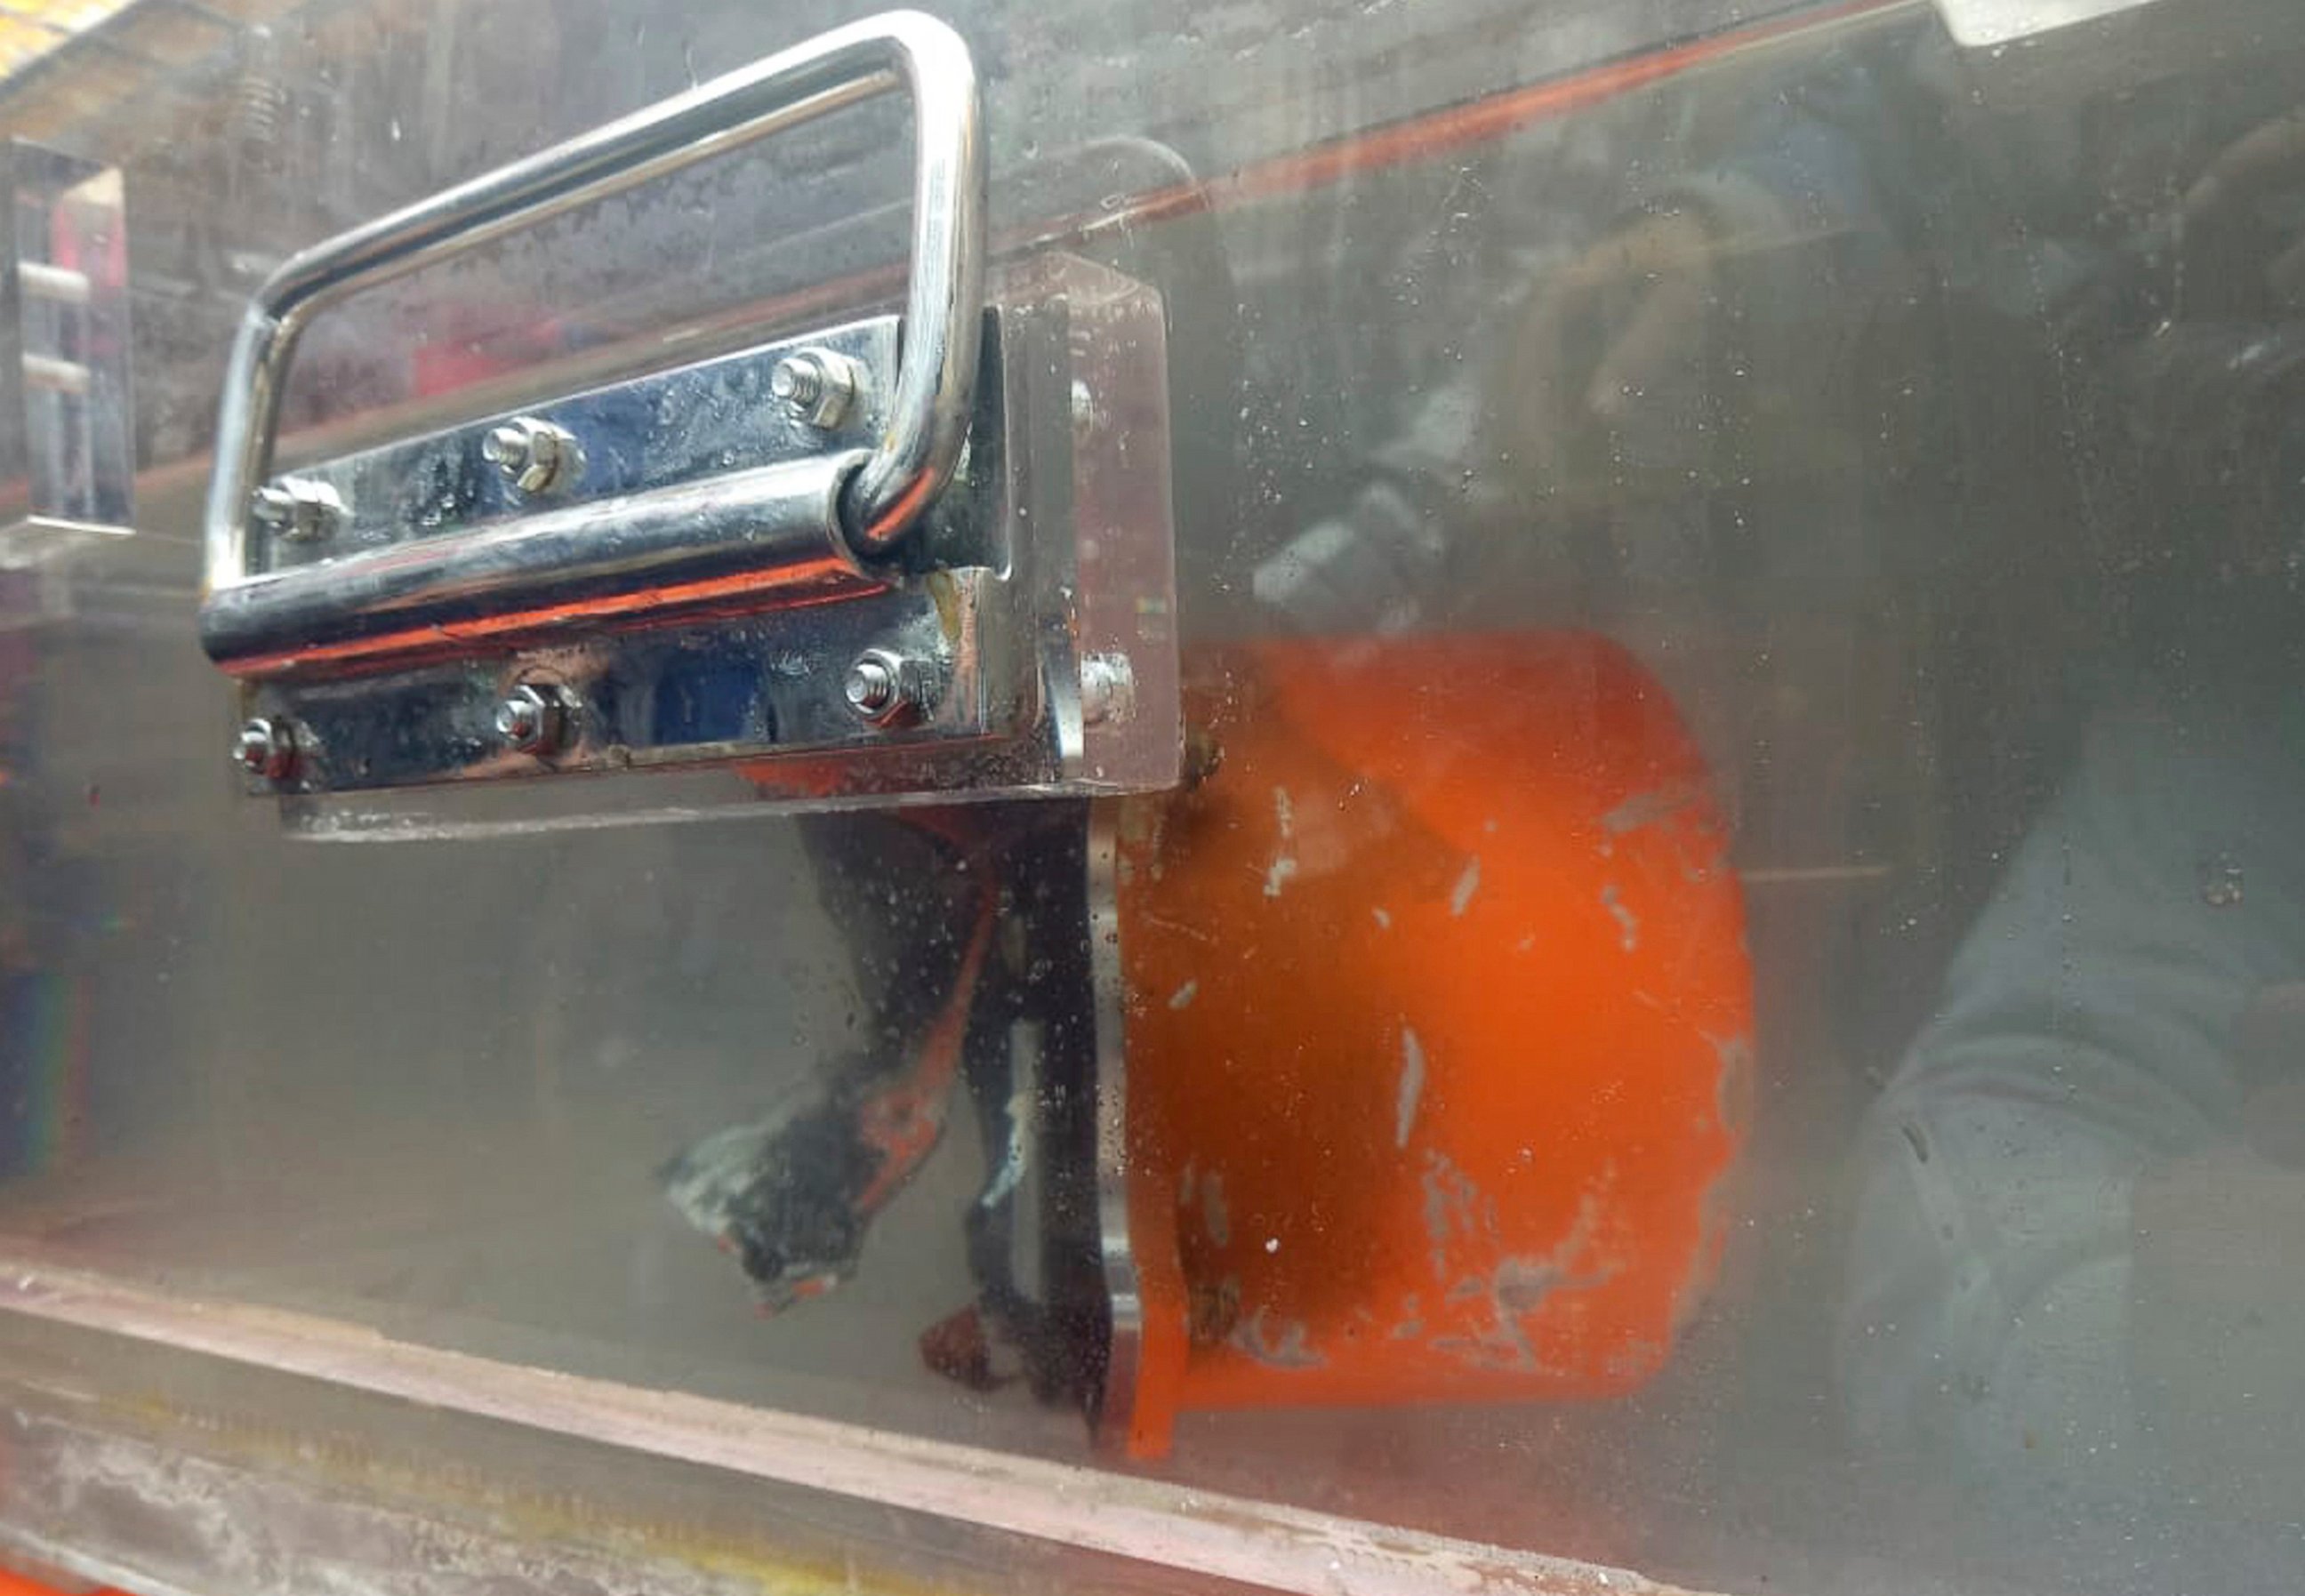 The recovered cockpit voice recorder of Lion Air flight 610 is kept in a water-filled container on board of Indonesian Navy ship KRI Spica in the waters of Tanjung Karawang, Indonesia, Monday, Jan. 14, 2019. Navy divers have recovered the cockpit voi